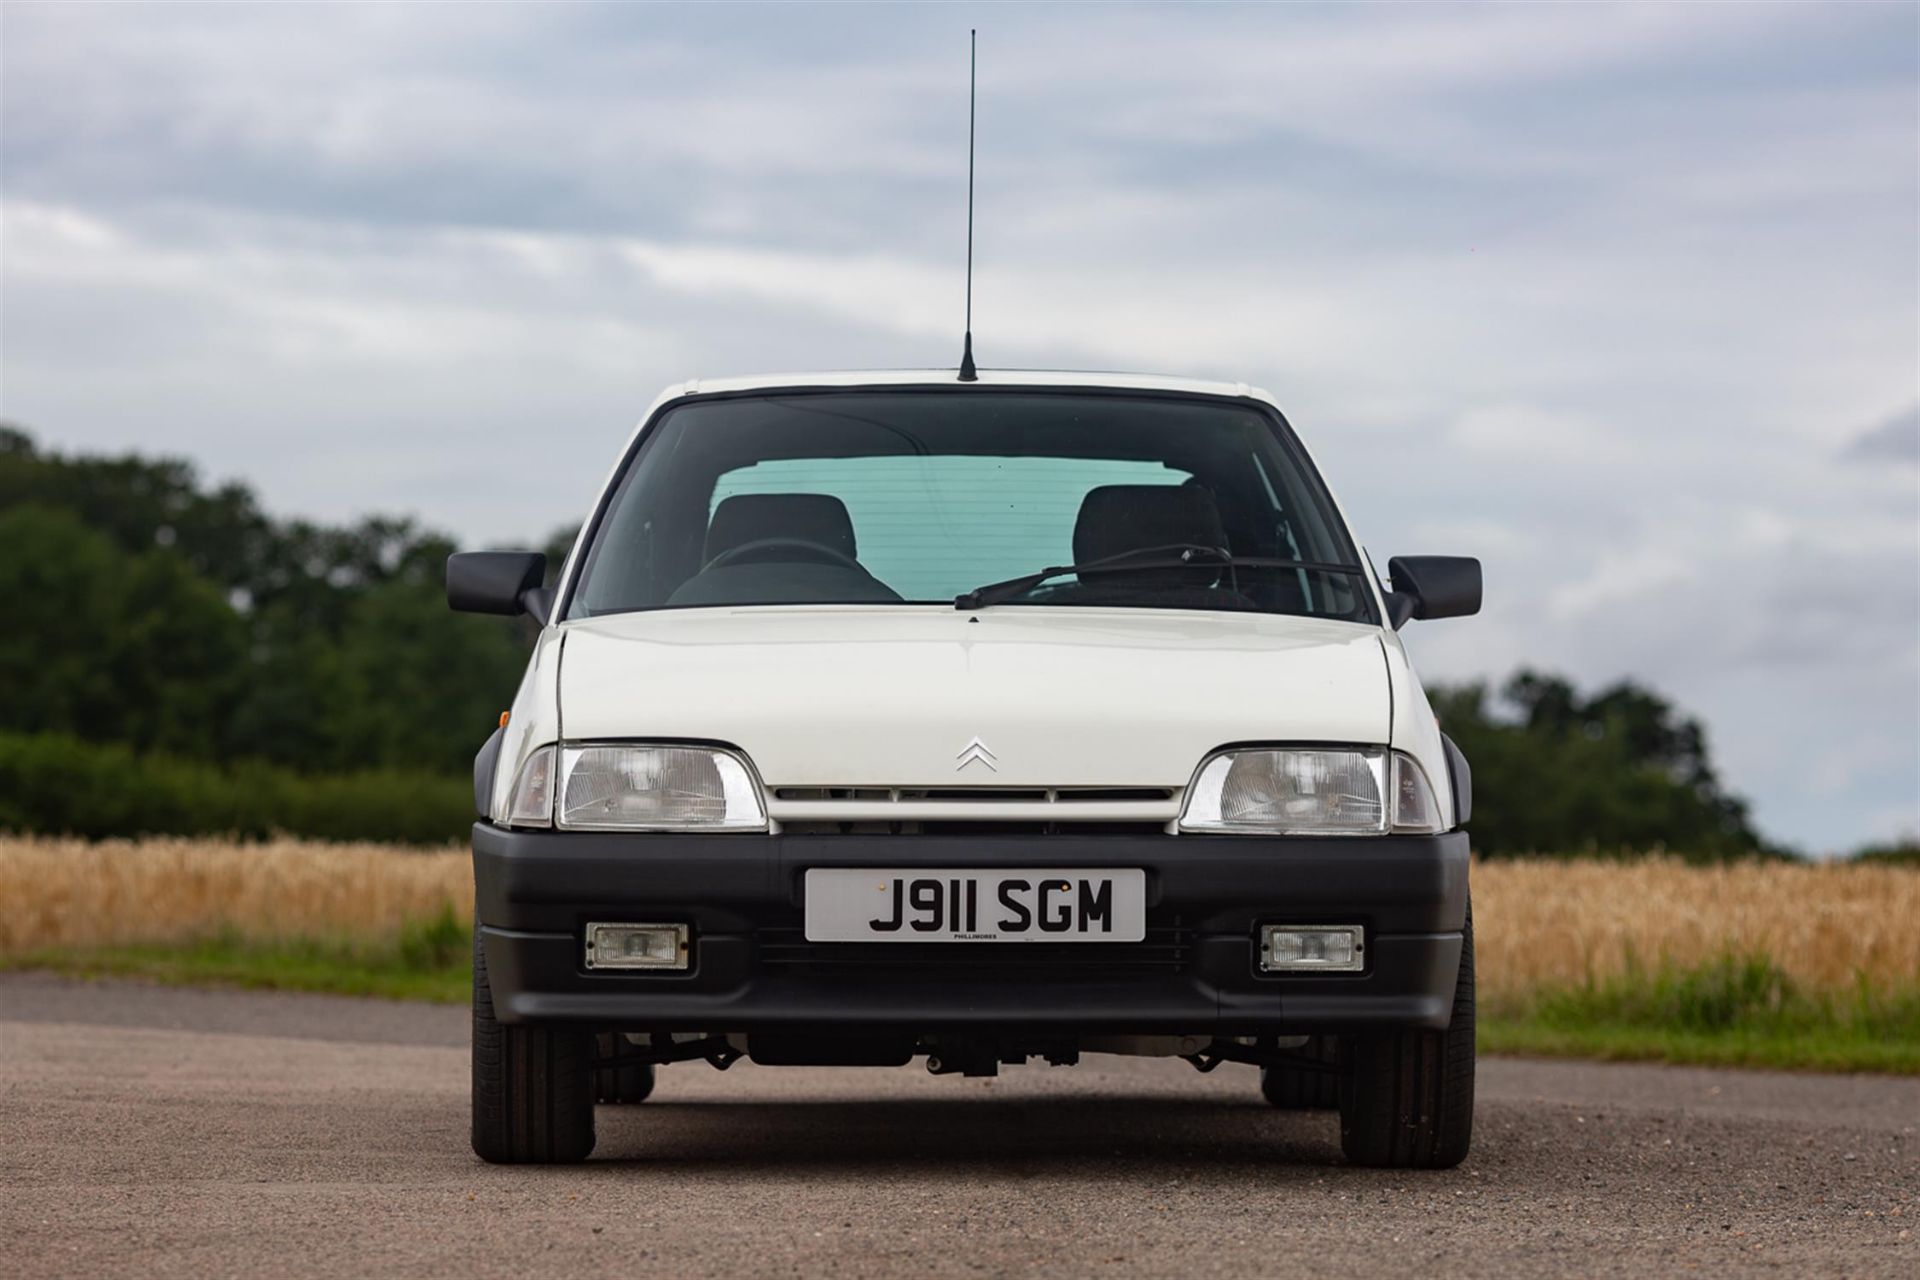 1991 Citroën AX GTi - 15,967 miles from new - Image 6 of 10